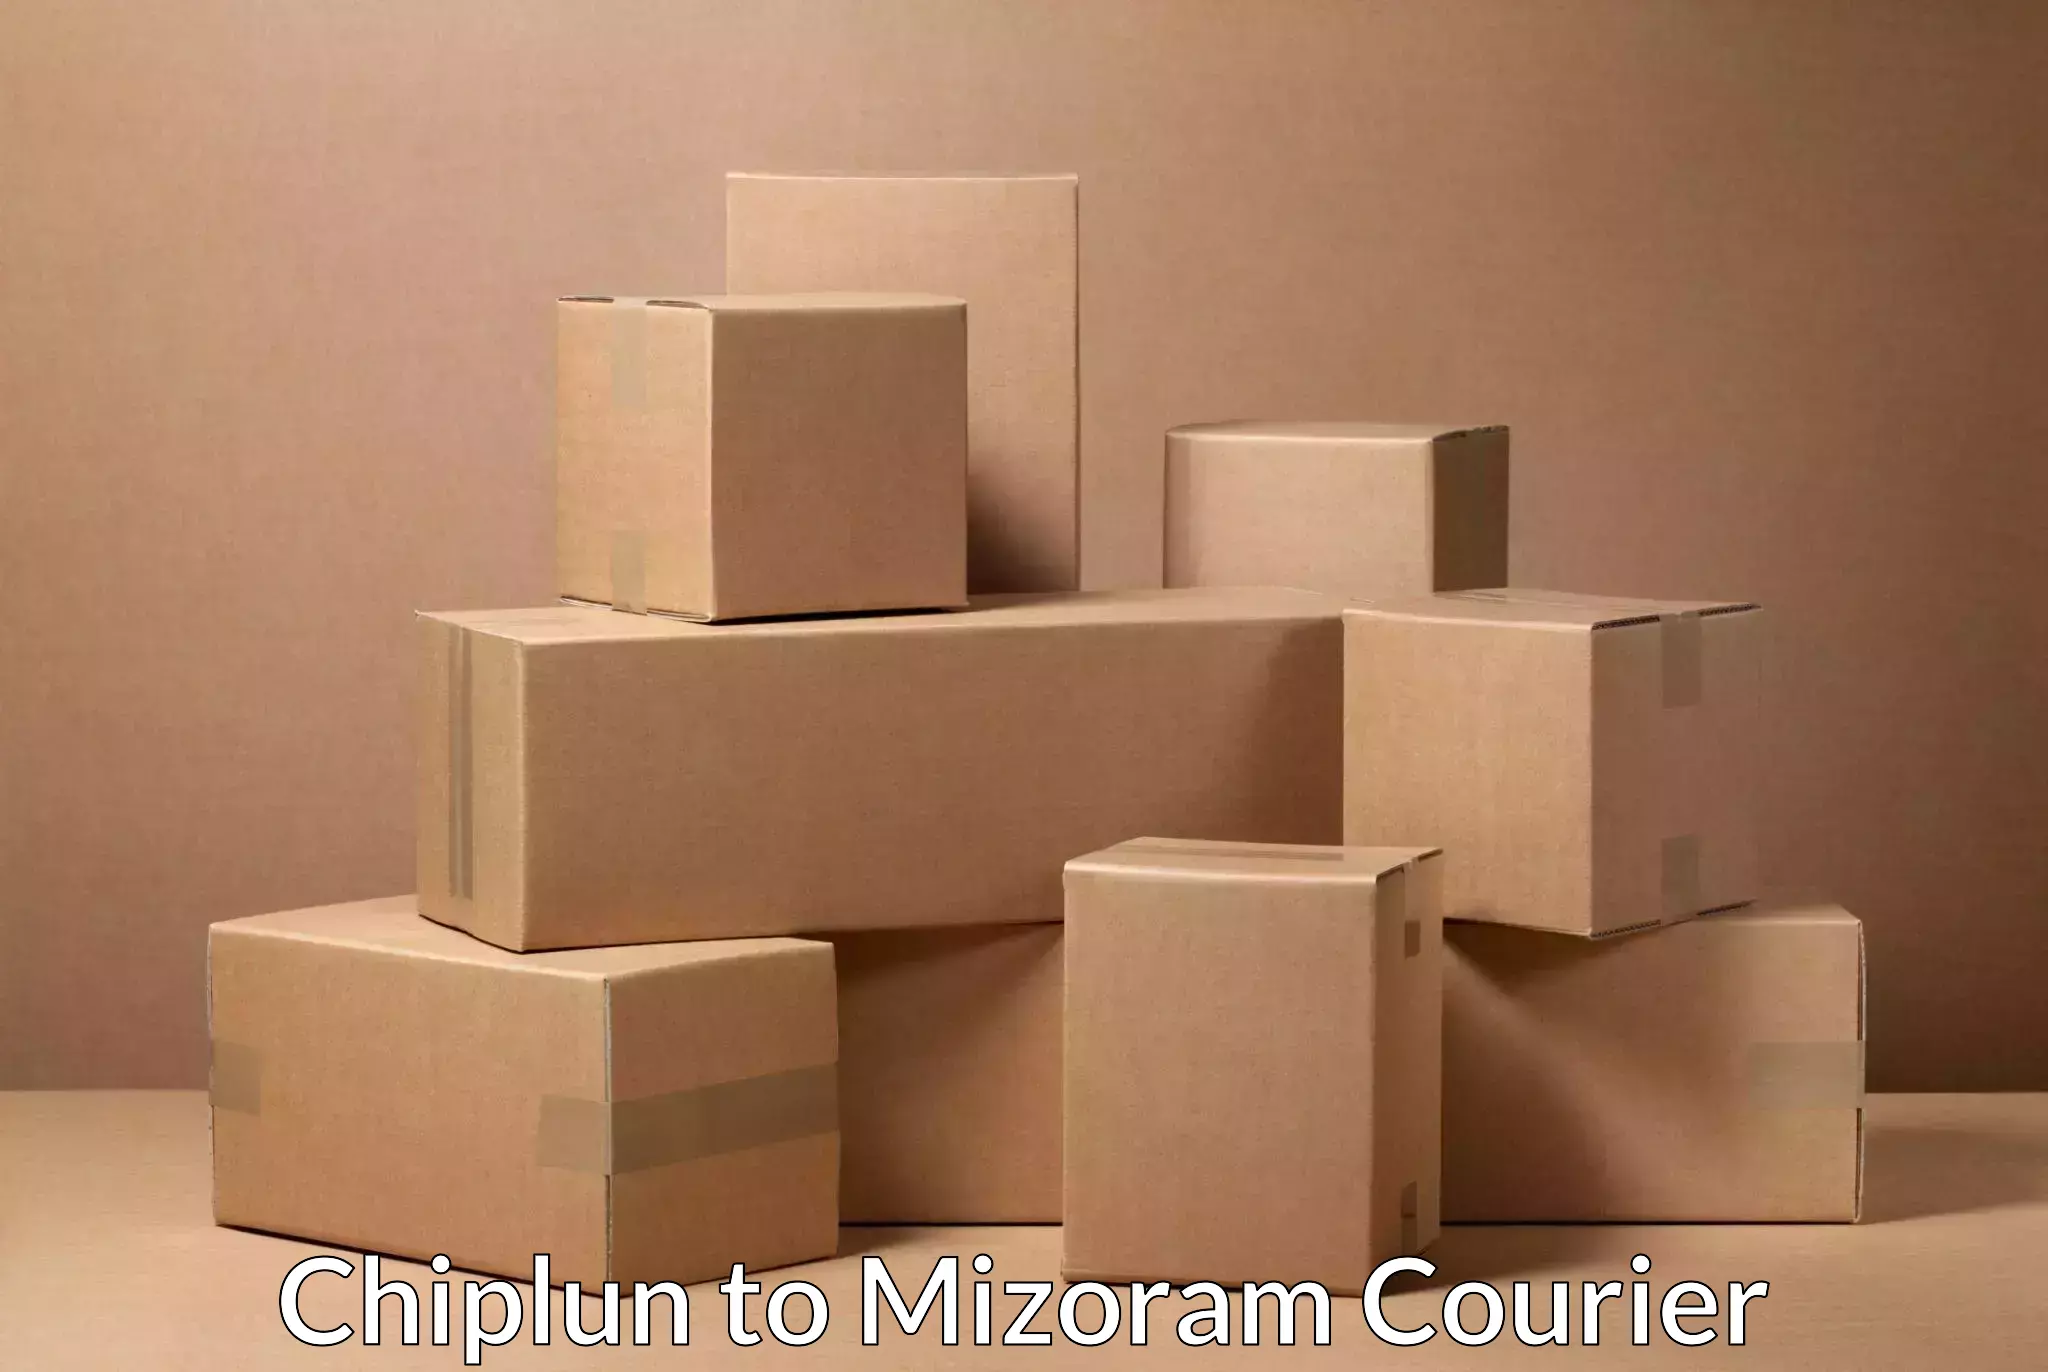 Global shipping solutions Chiplun to Mizoram